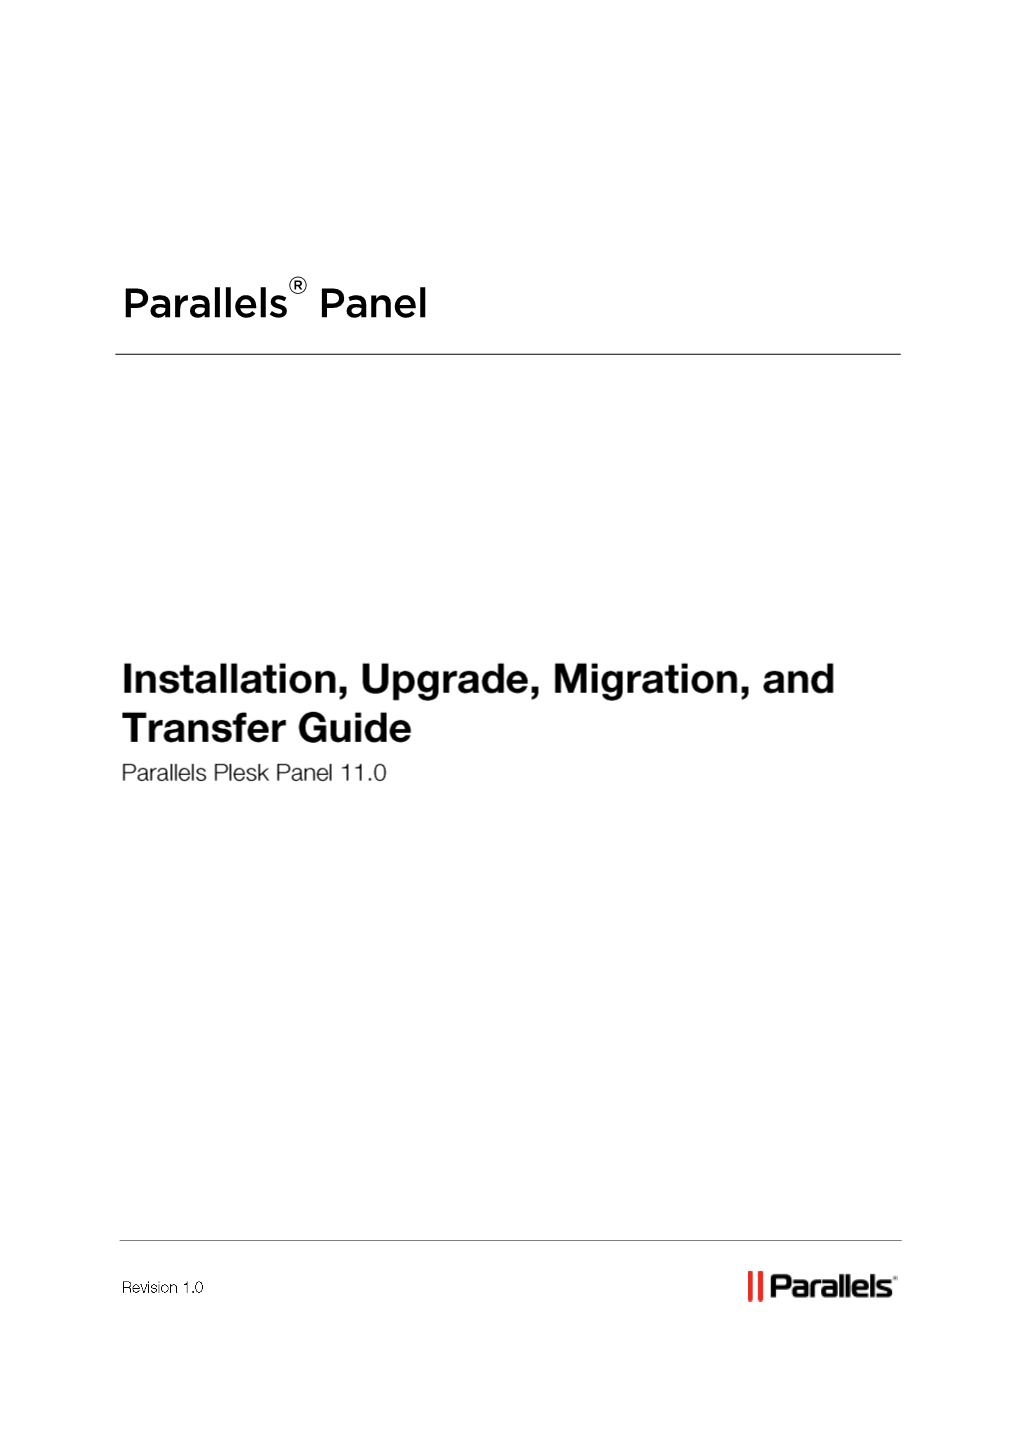 Parallels Plesk Panel on Physical and Virtual Servers